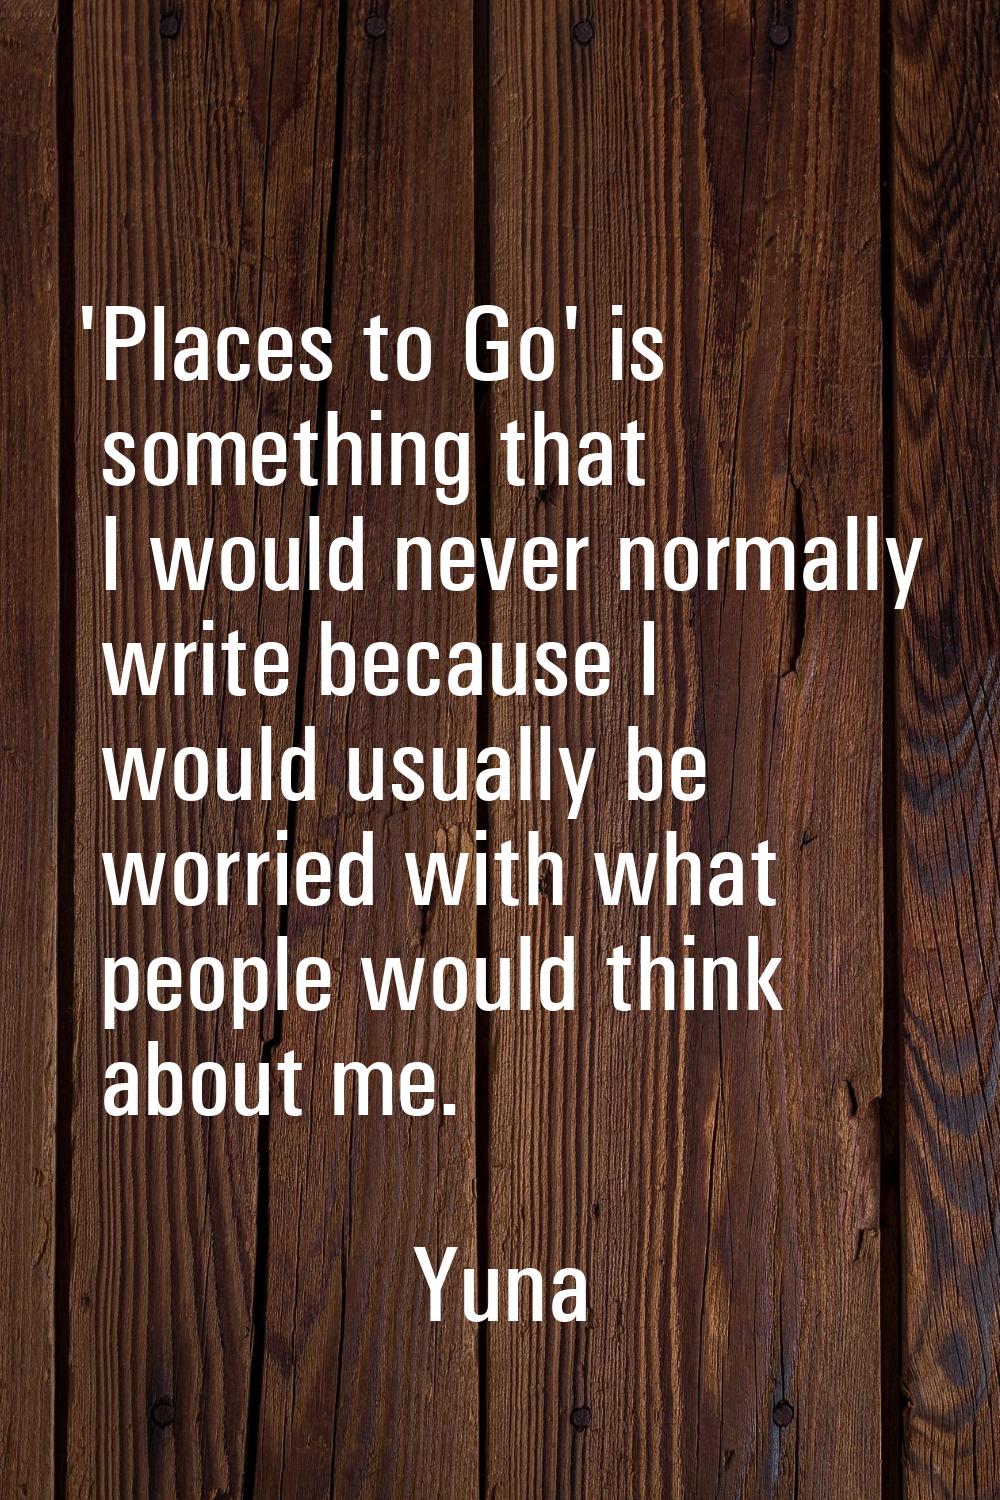 'Places to Go' is something that I would never normally write because I would usually be worried wi